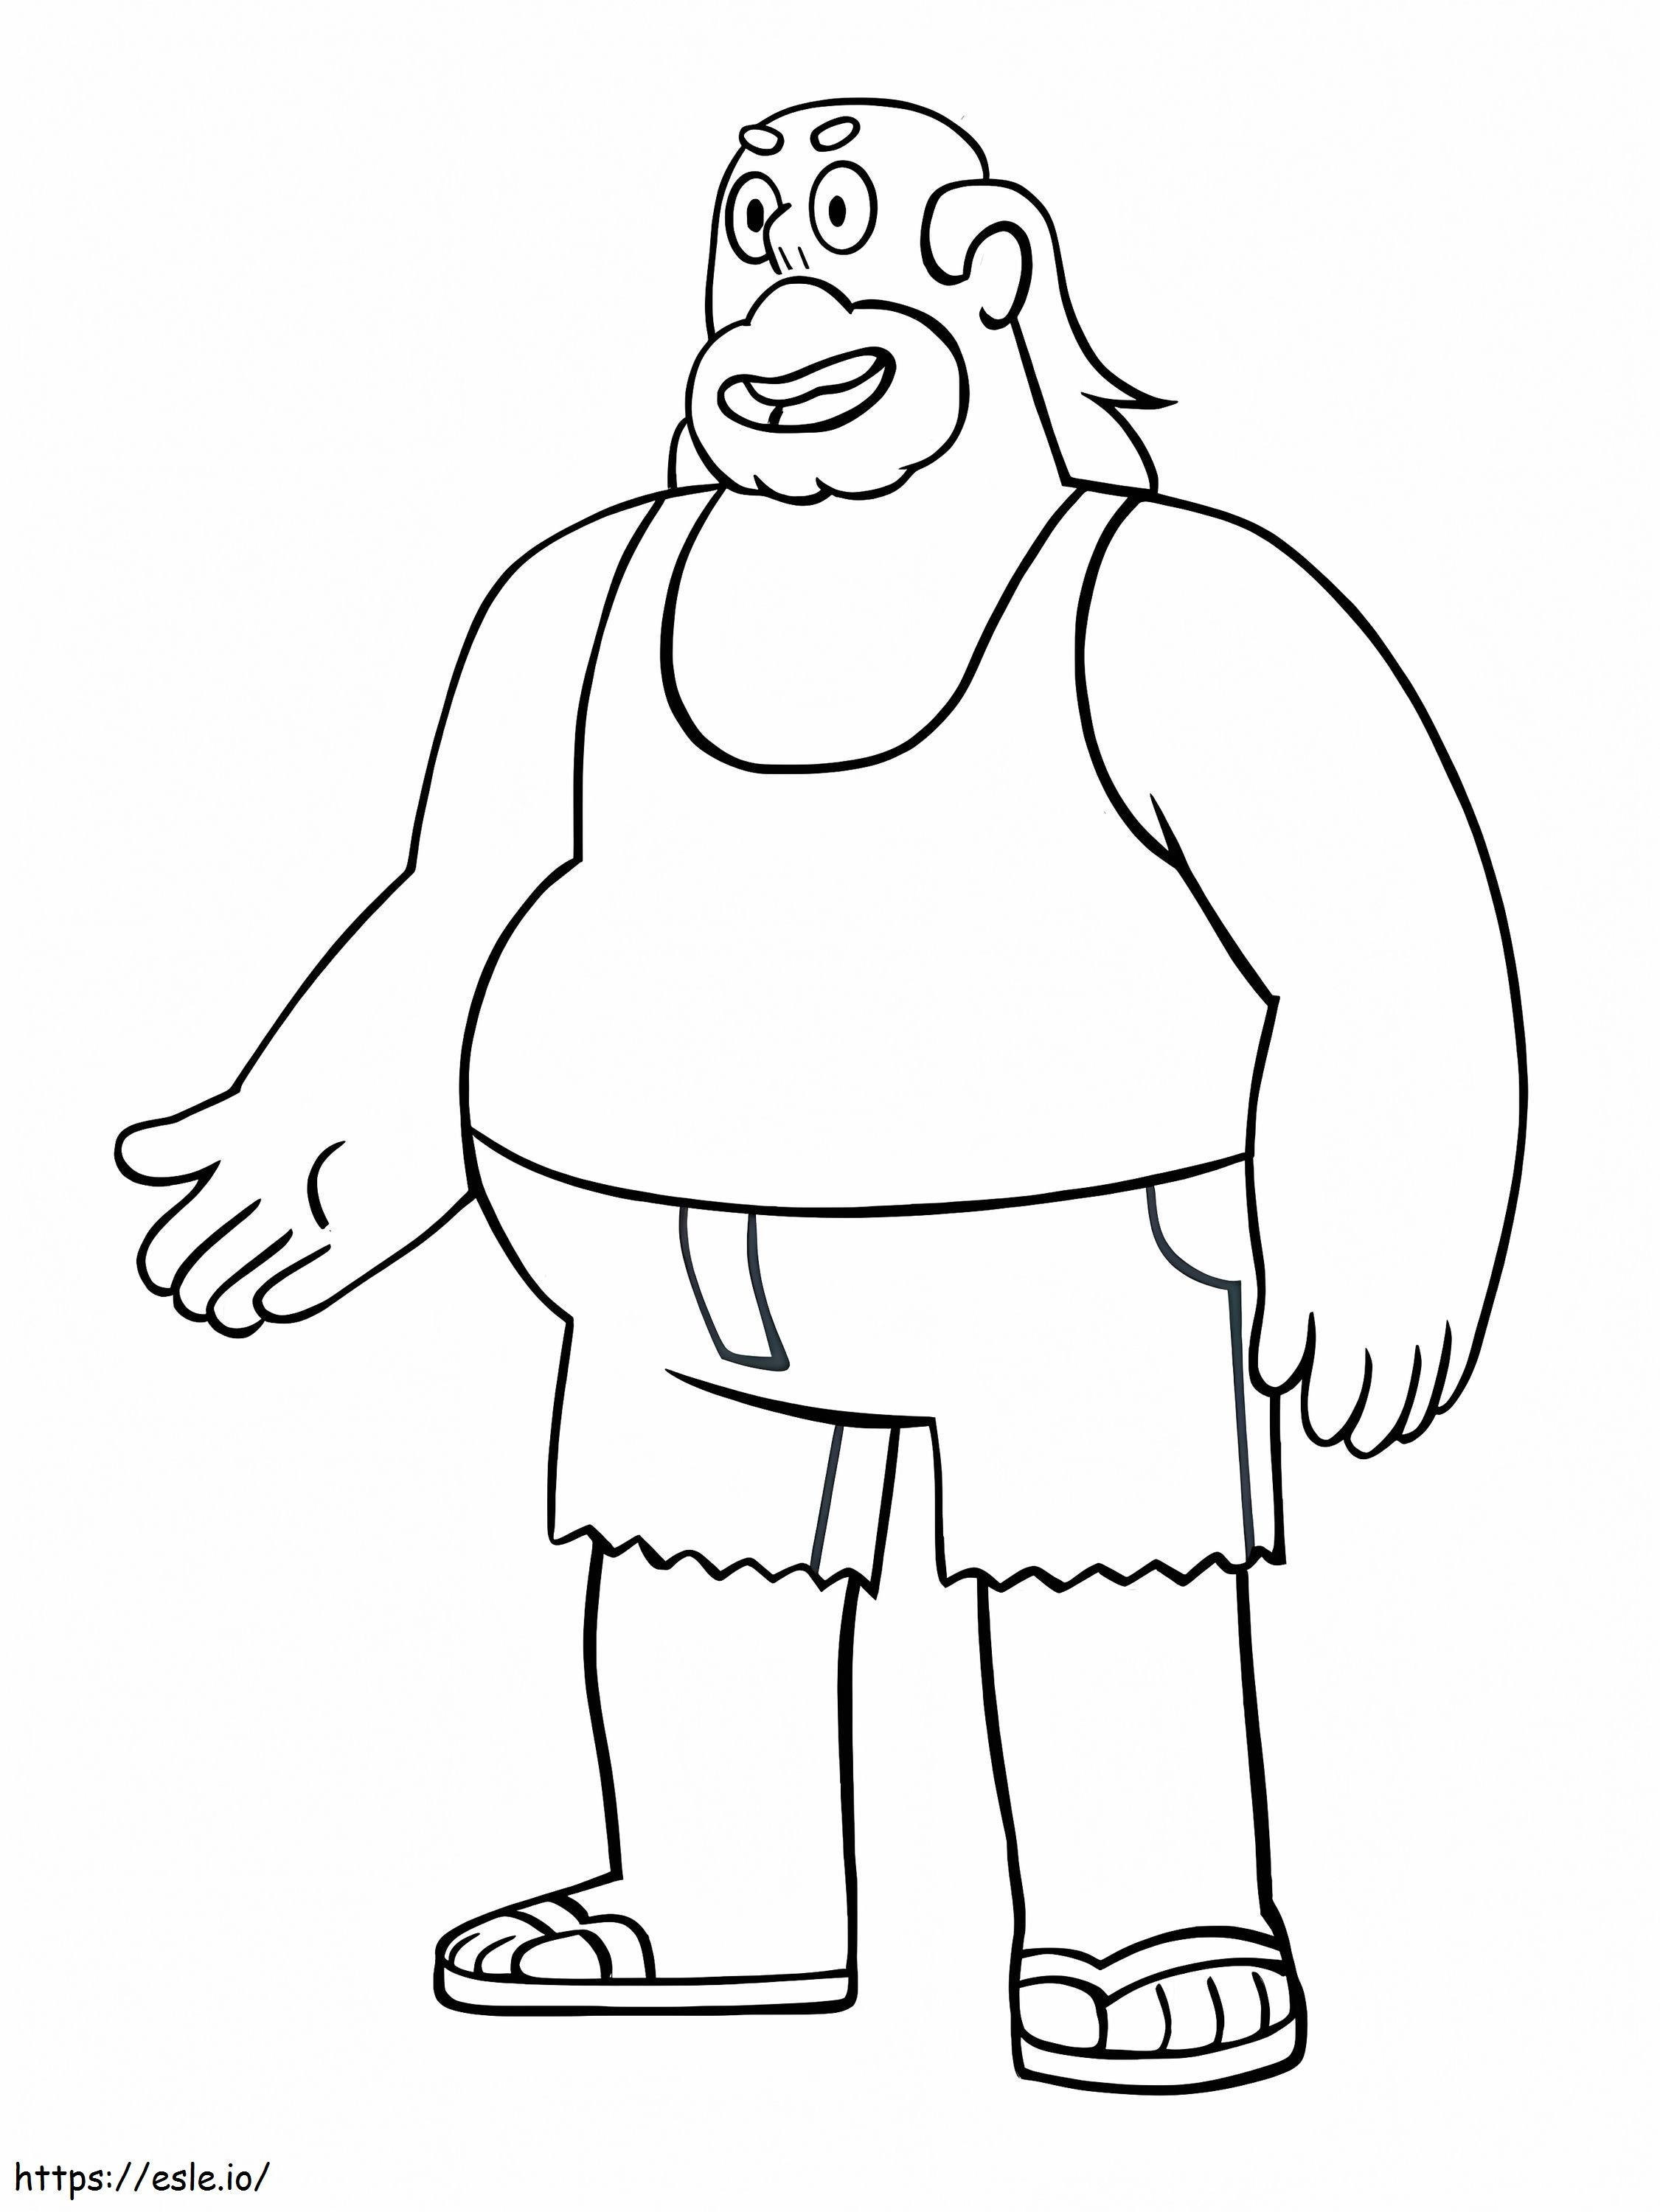 Greg Universe coloring page